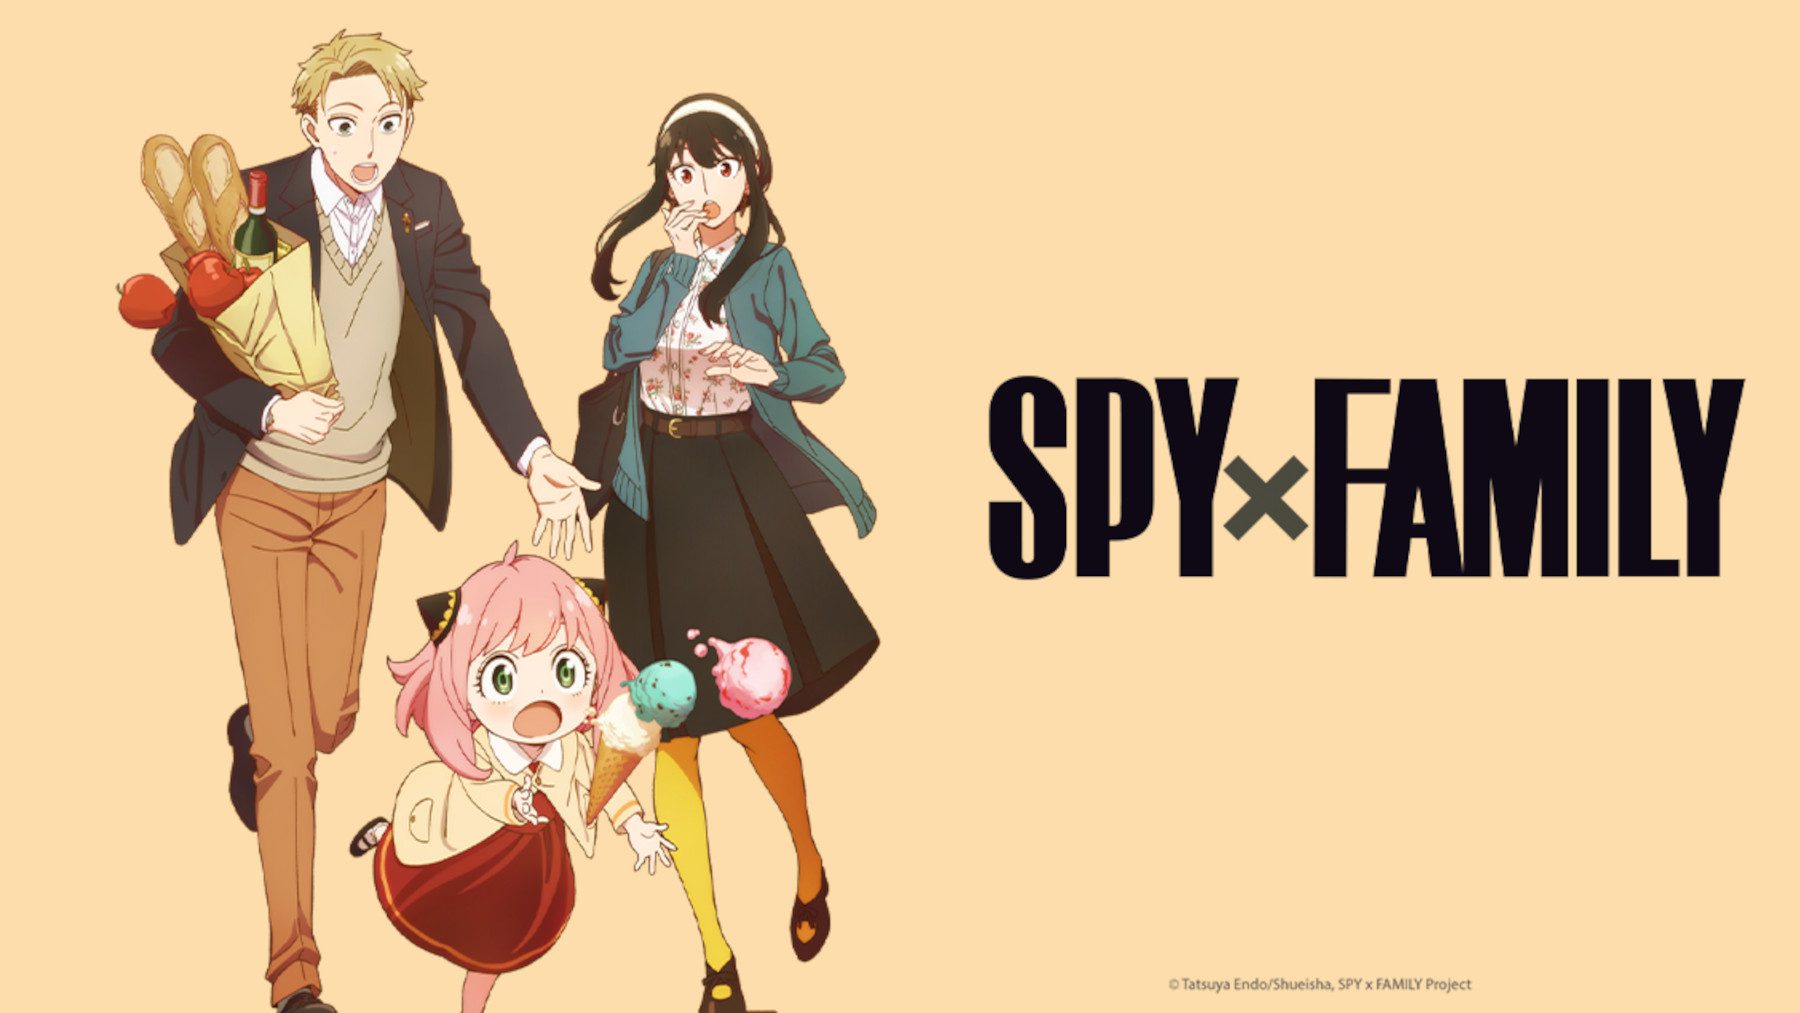 Family of spies